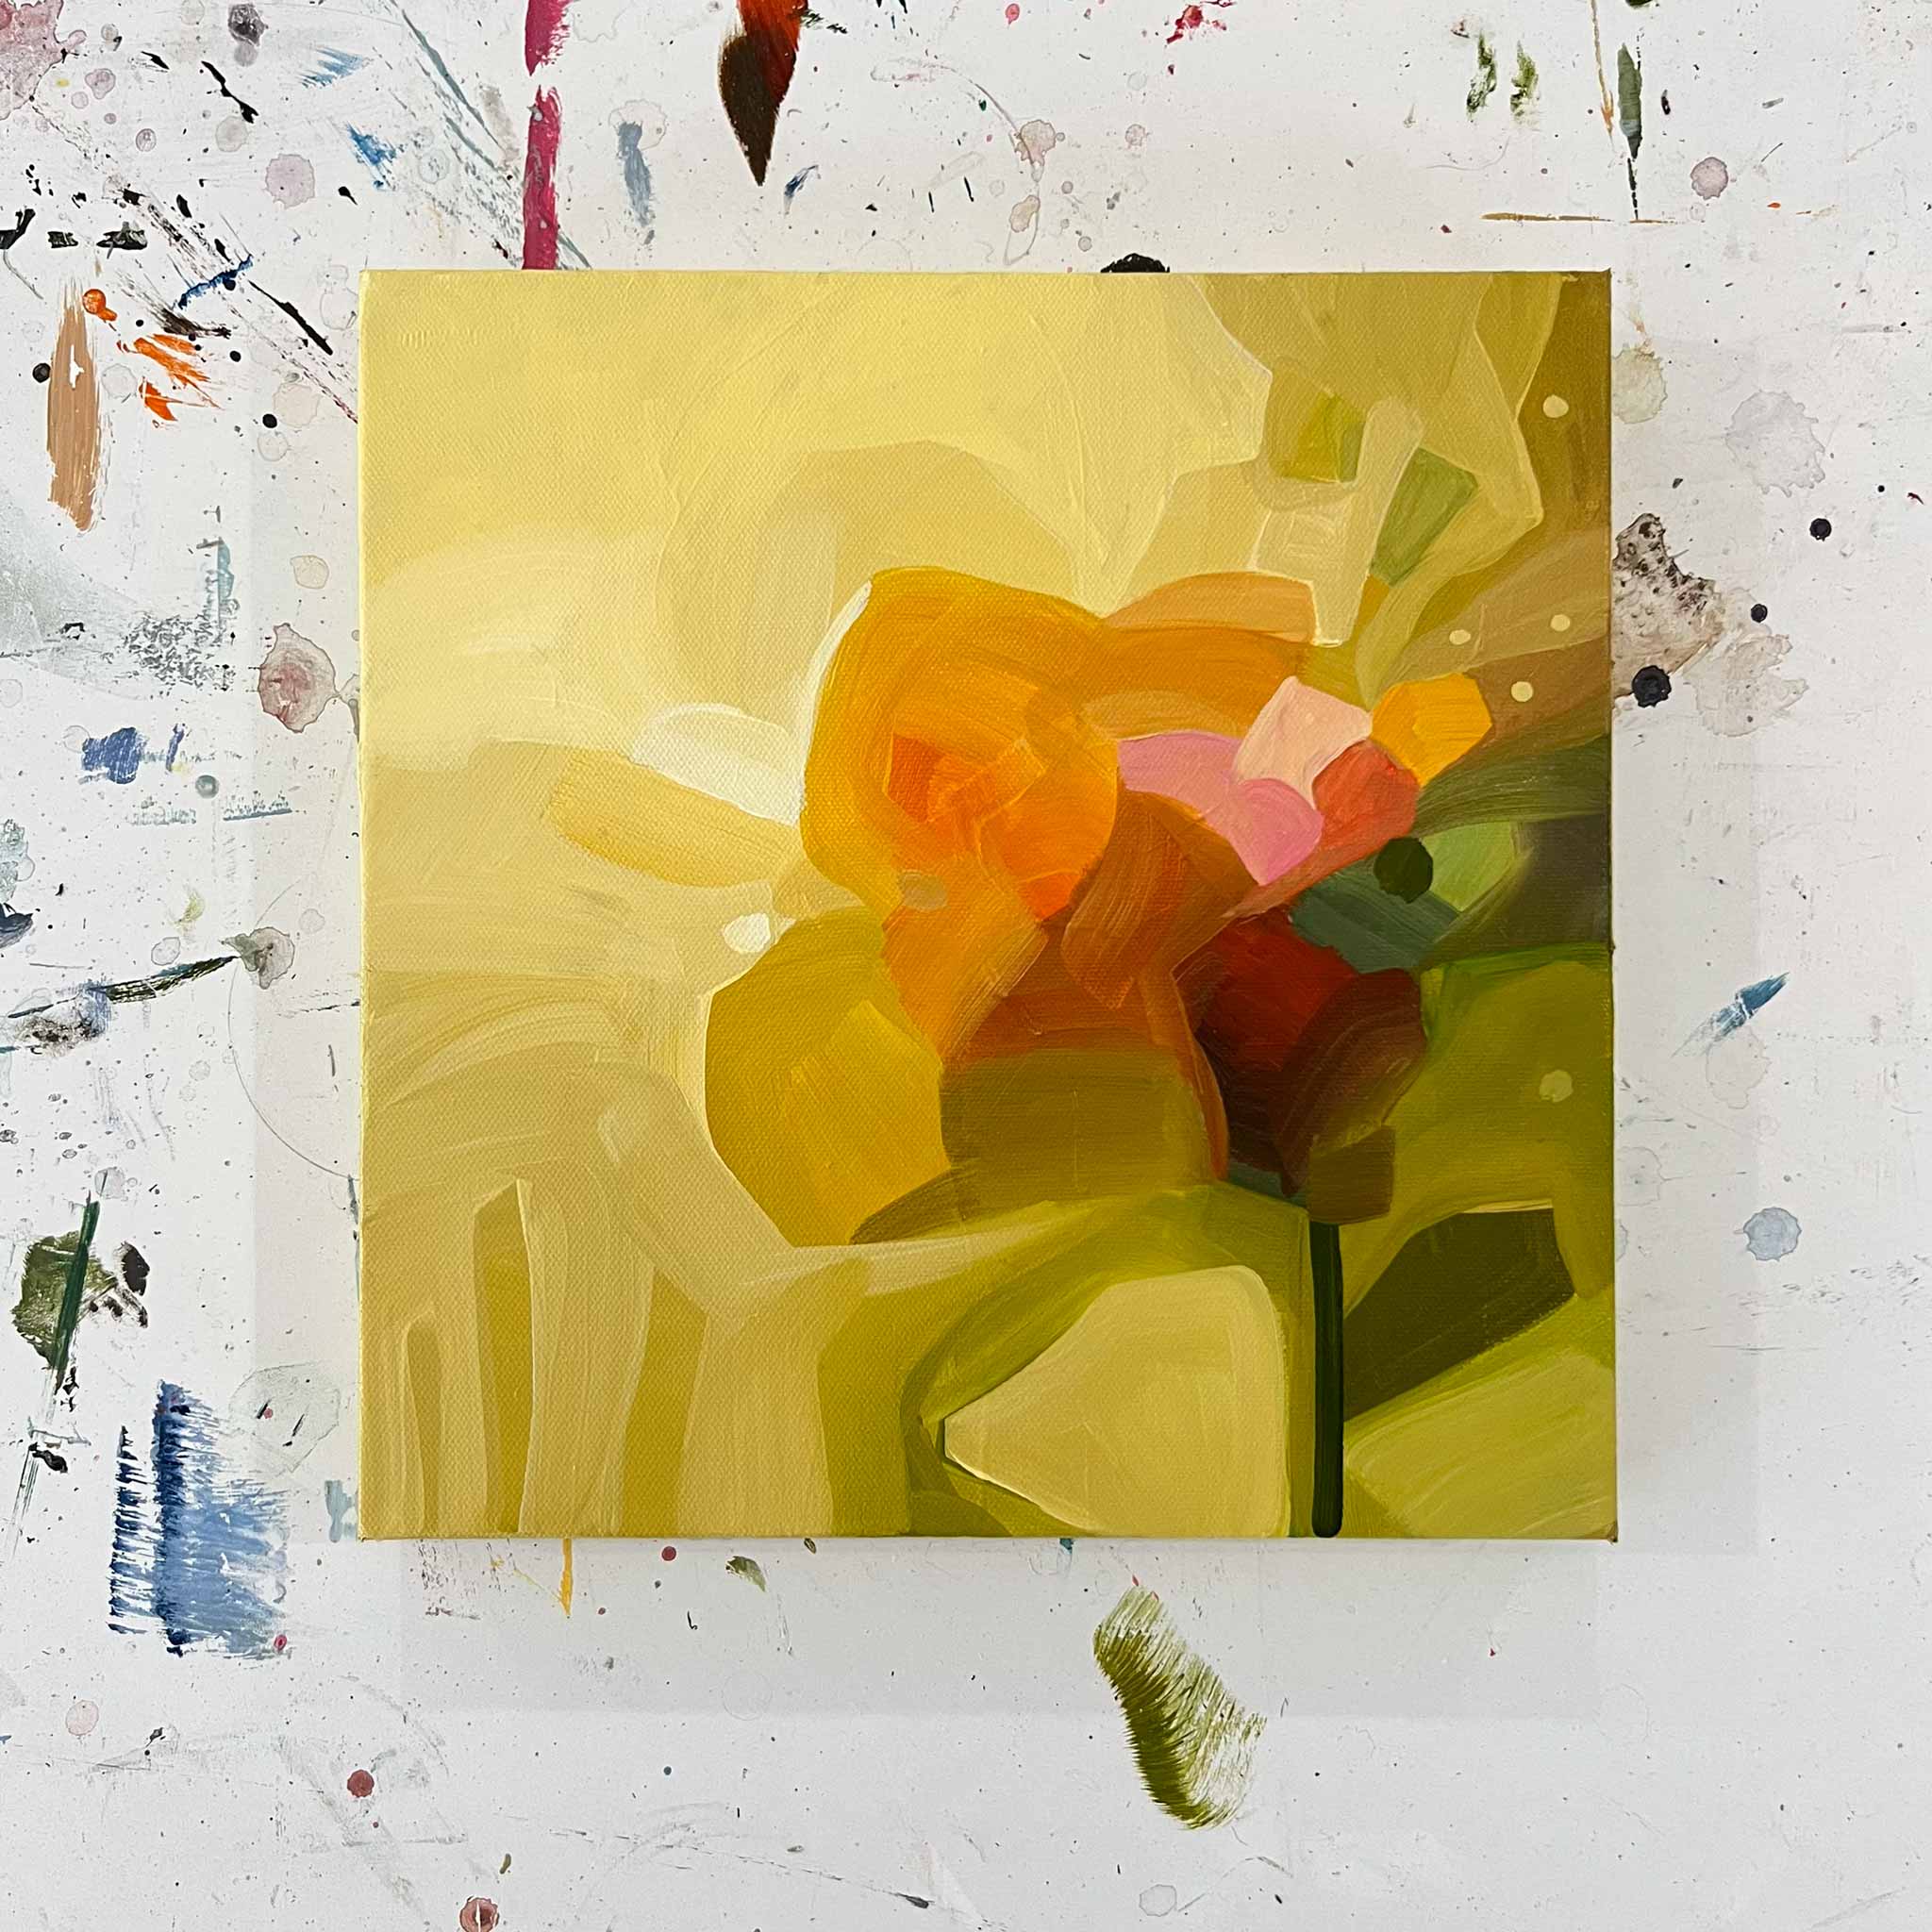 12x12 yellow abstract floral painting by Canadian abstract artist Susannah Bleasby